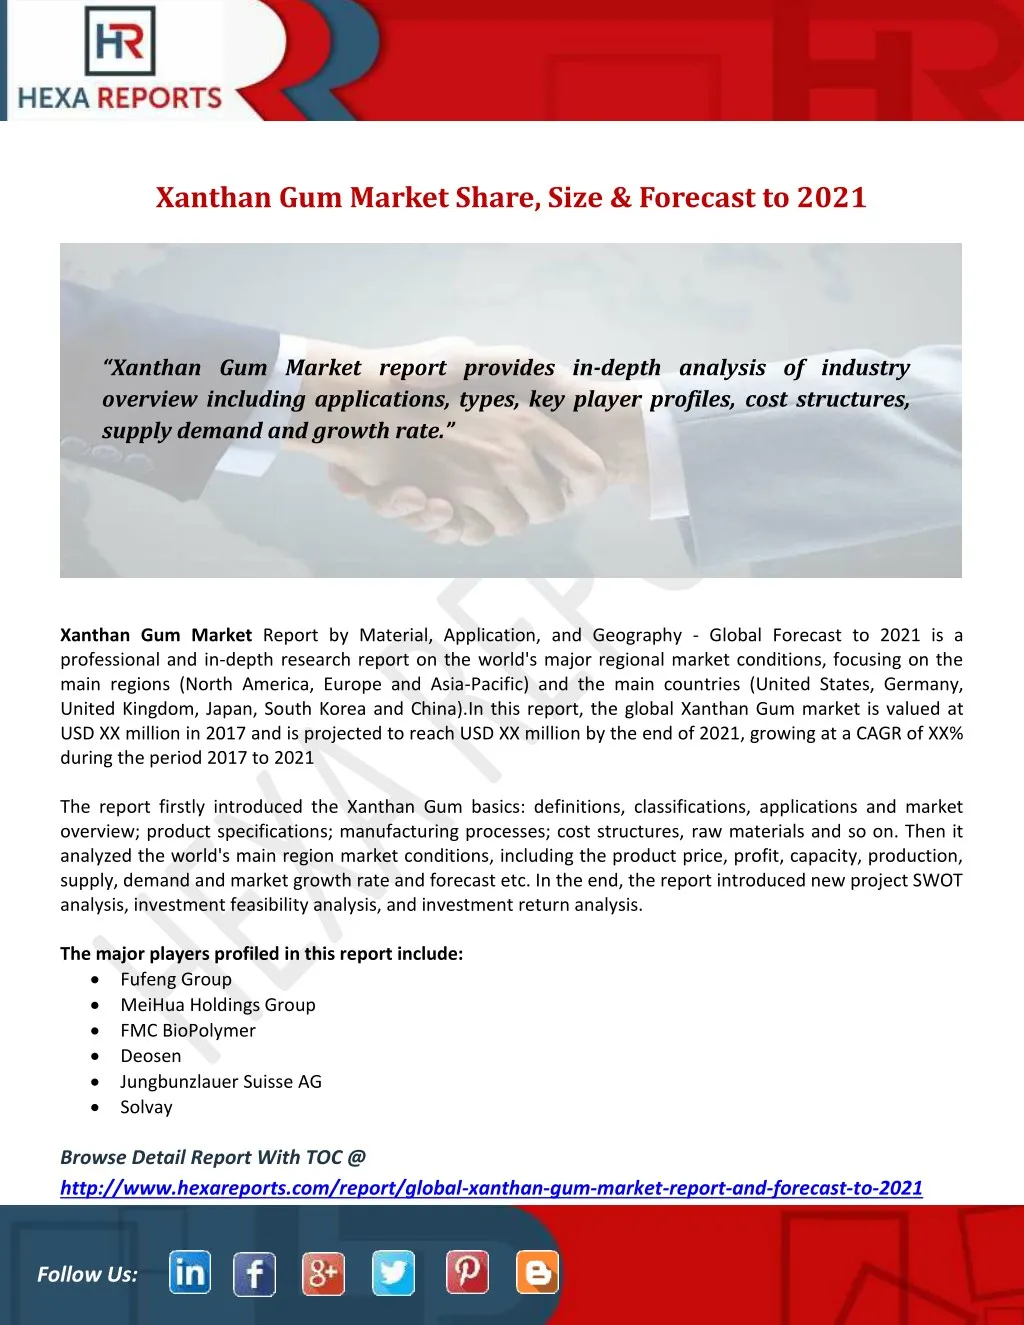 xanthan gum market share size forecast to 2021